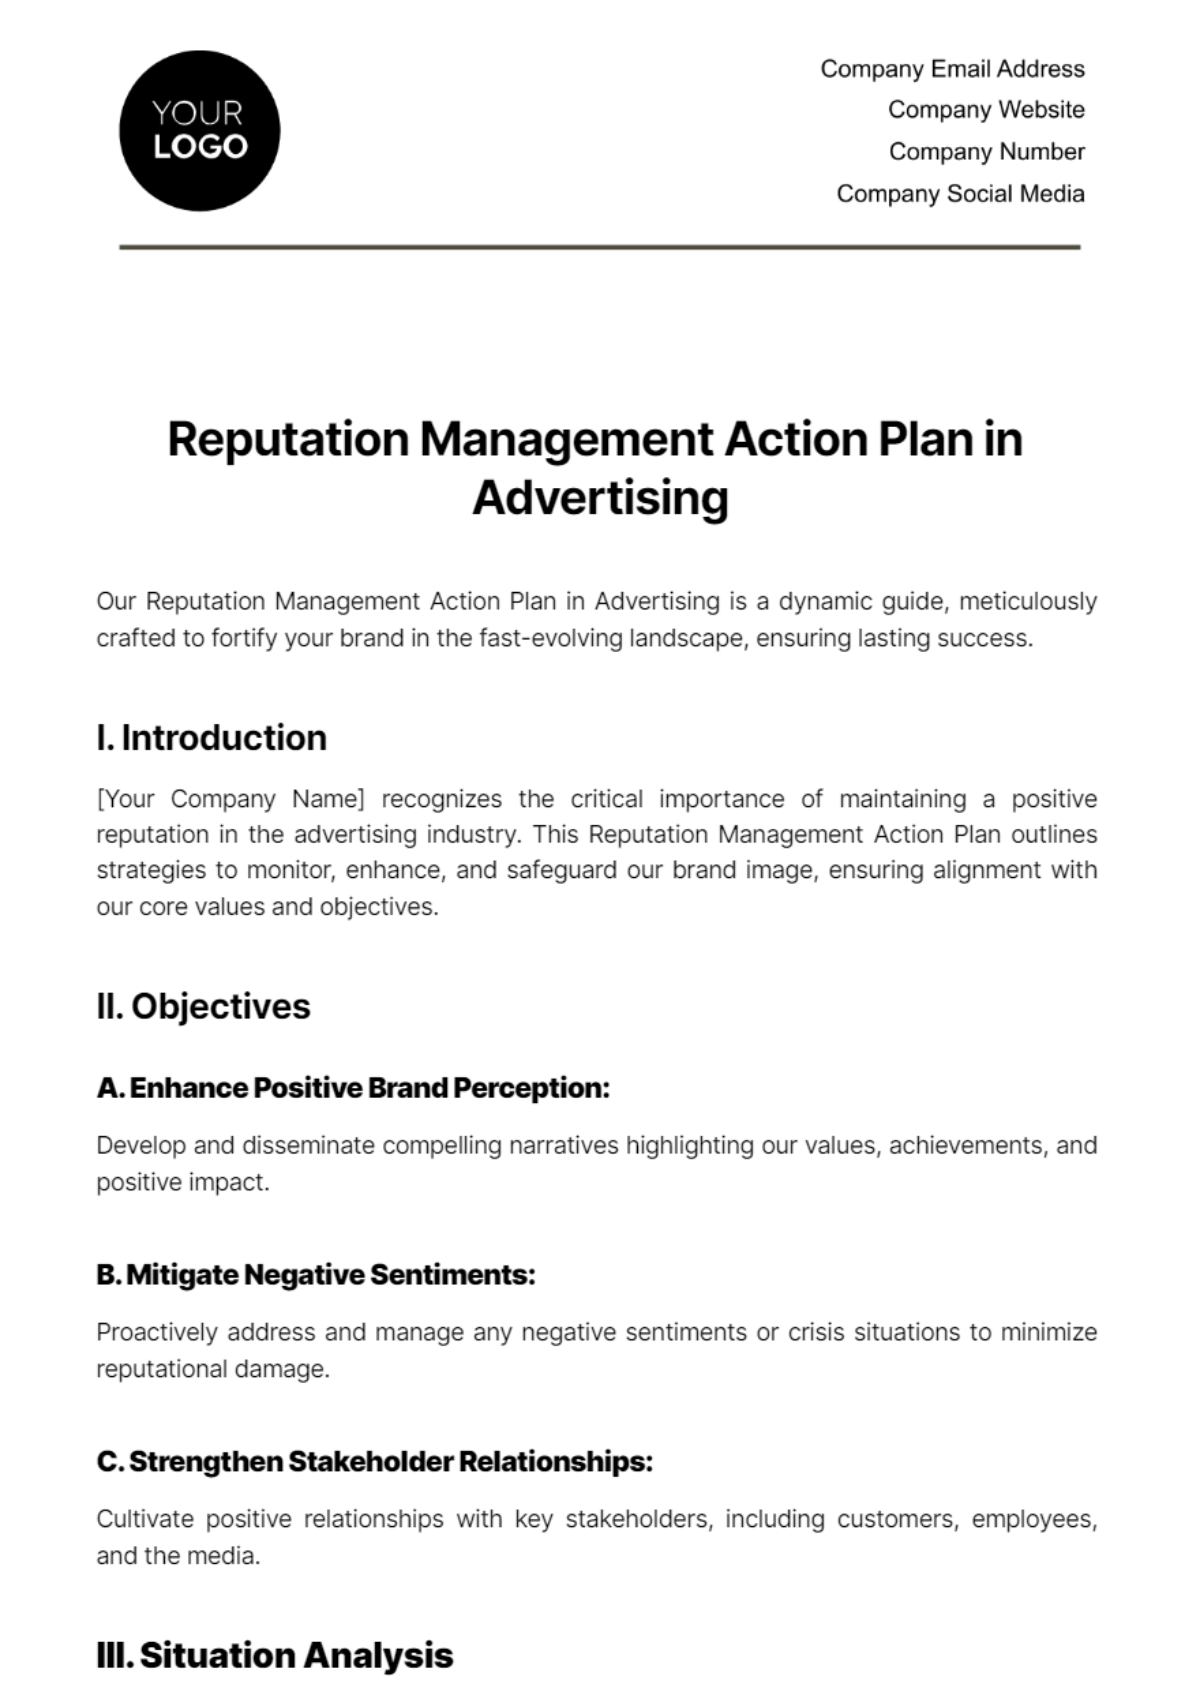 Free Reputation Management Action Plan in Advertising Template